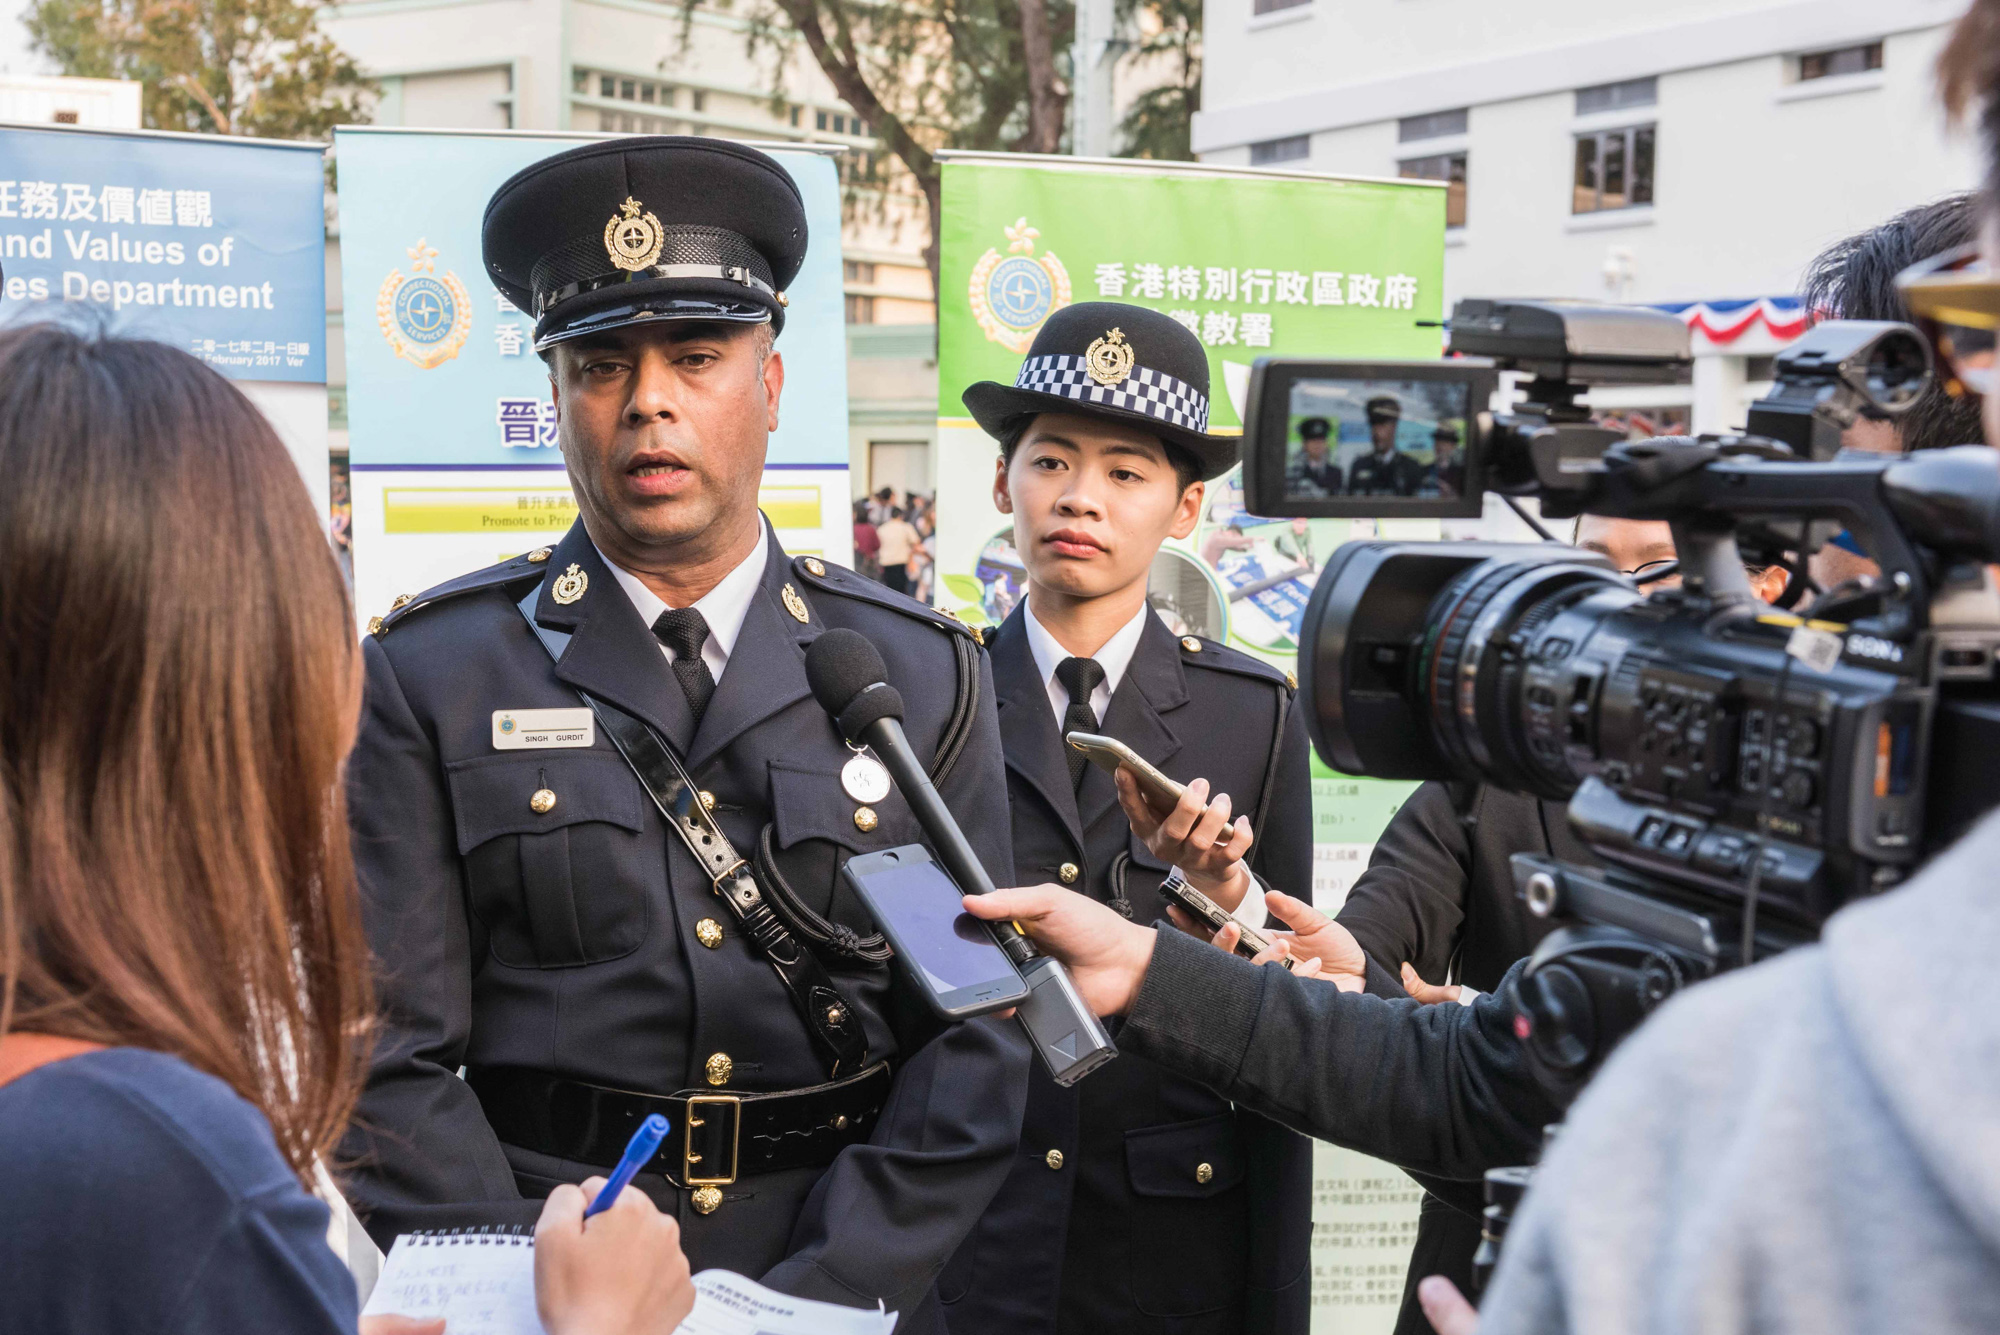 The Public Relations Unit arranged media interviews with correctional officers at the passing-out parade on December 7, 2017.